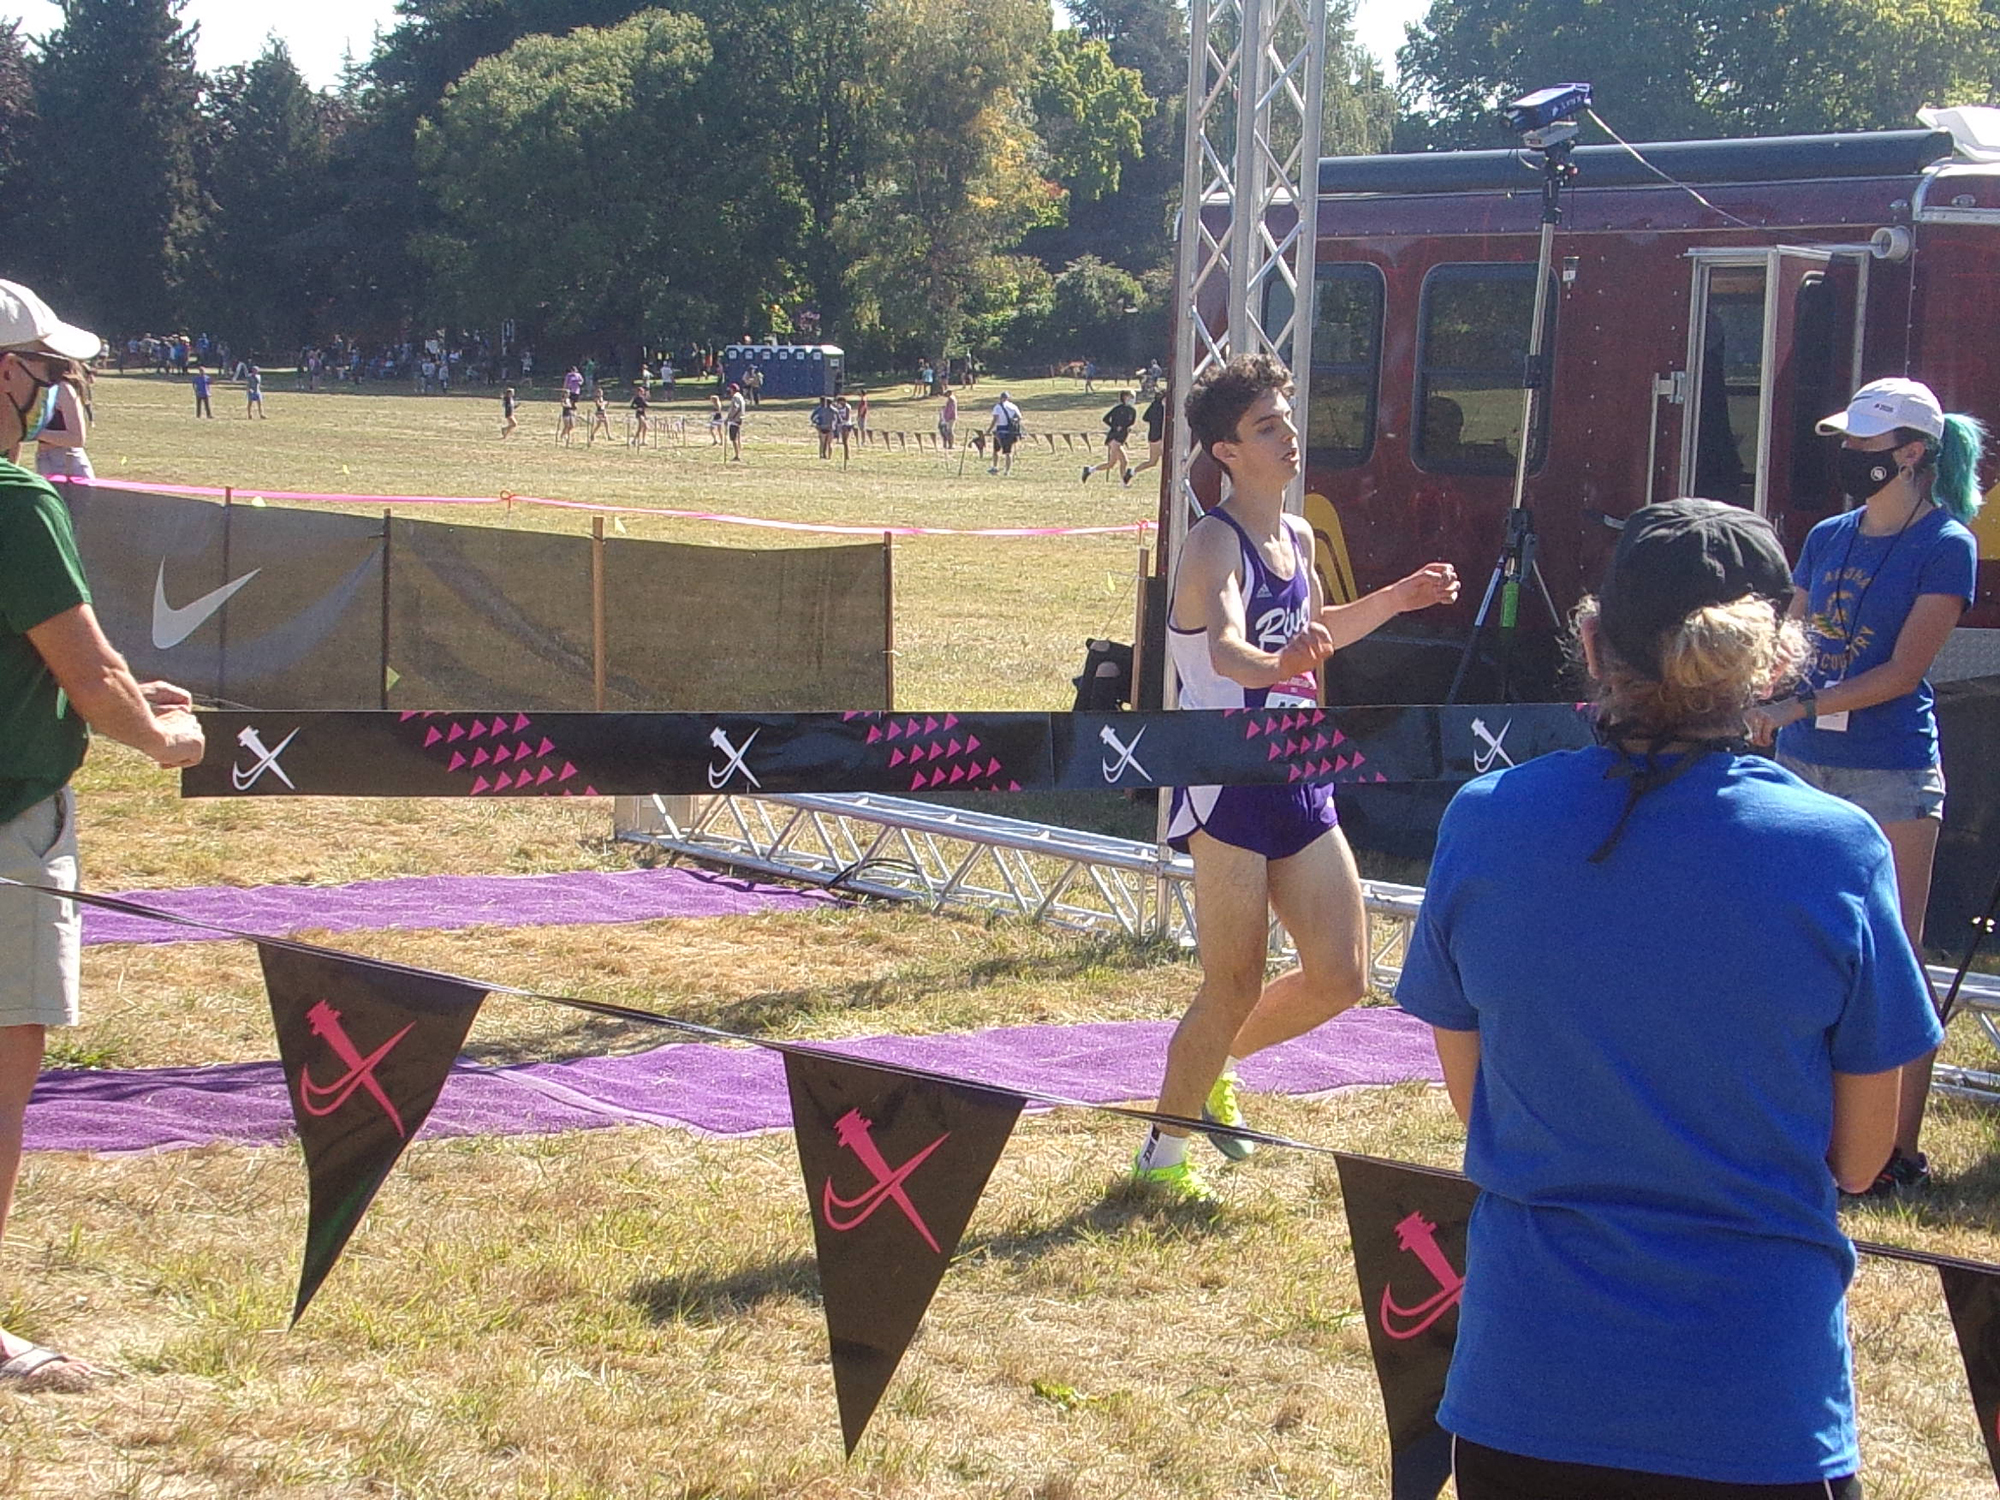 Columbia River's Daniel Barna breaks the finish tape after winning the Division I boys race at the Nike Portland XC meet on Saturday, Sept. 25, 2021 in Fairview, Ore.